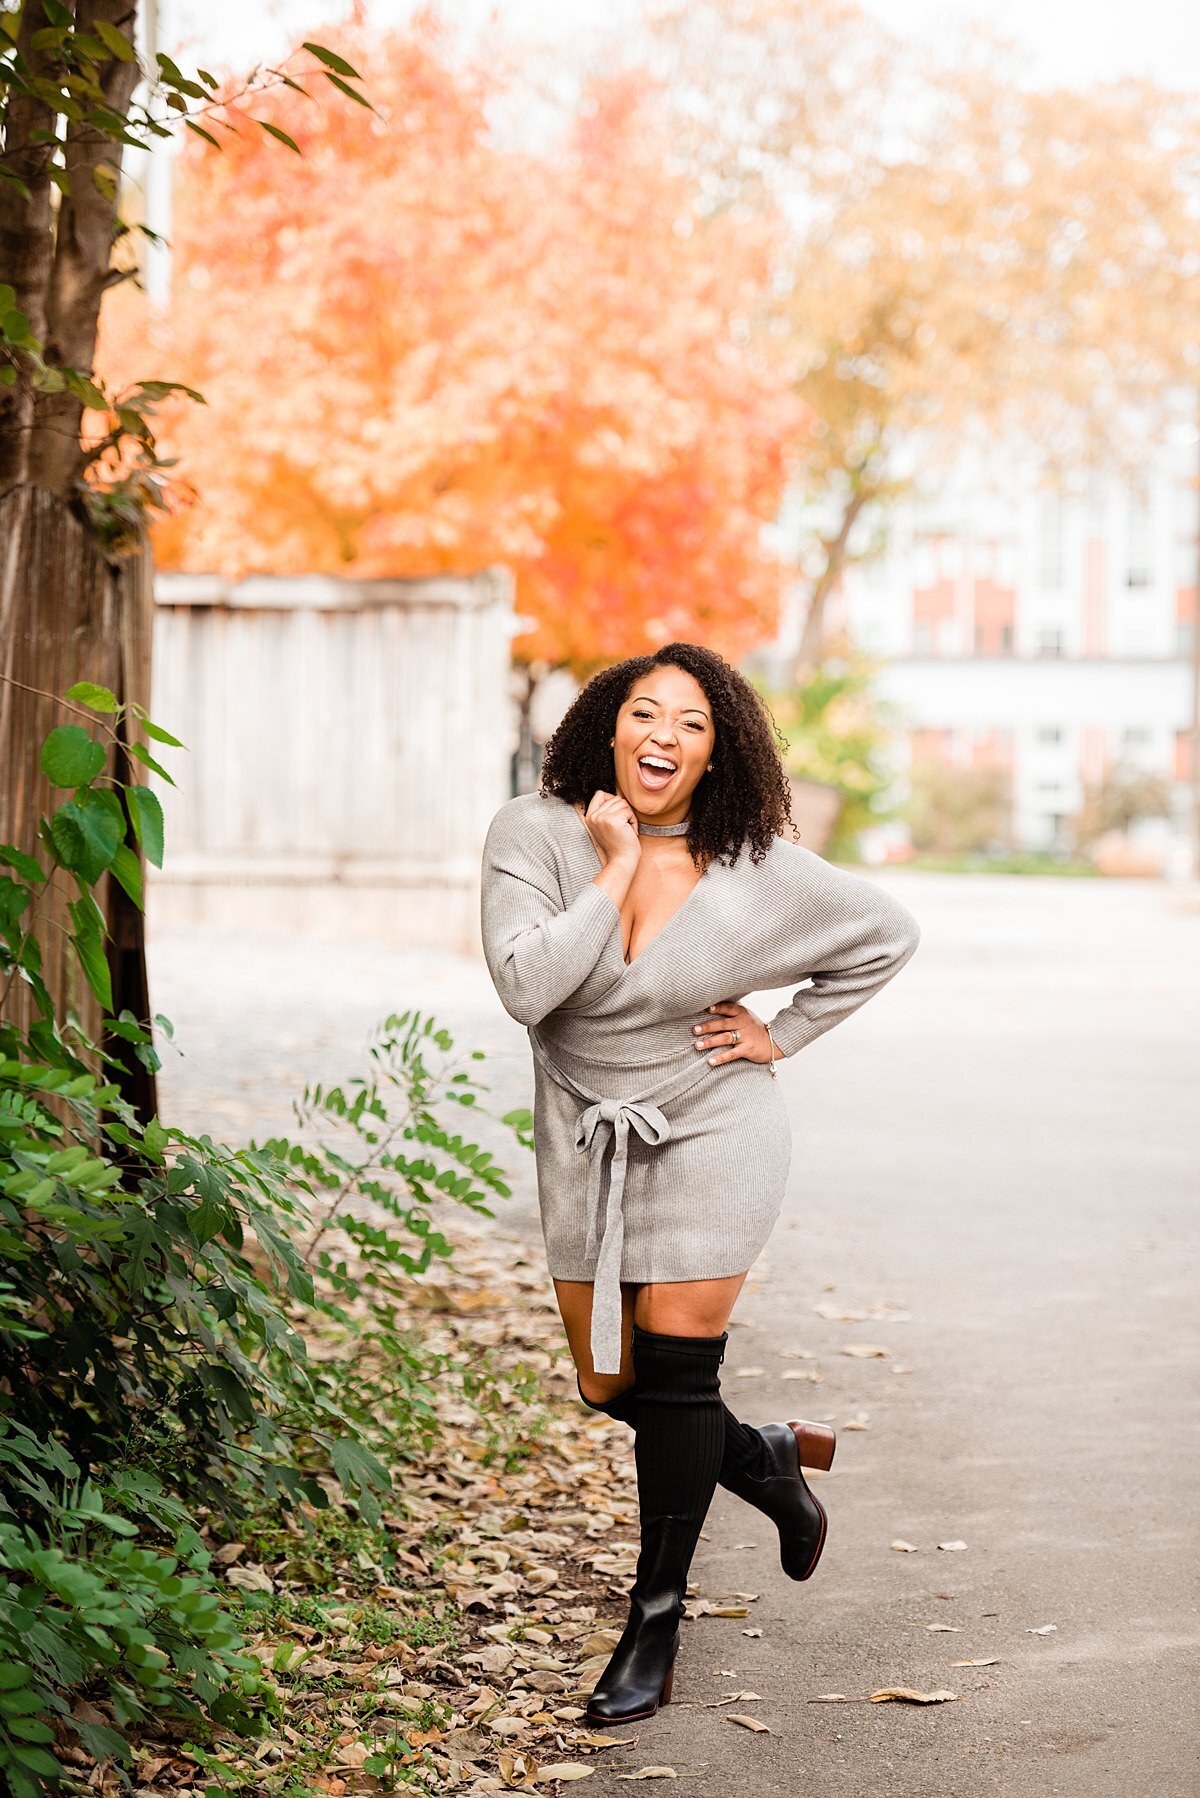 Jasmine Sweet wearing a grey jumper and thigh high boots laughing at the camera on a fall day